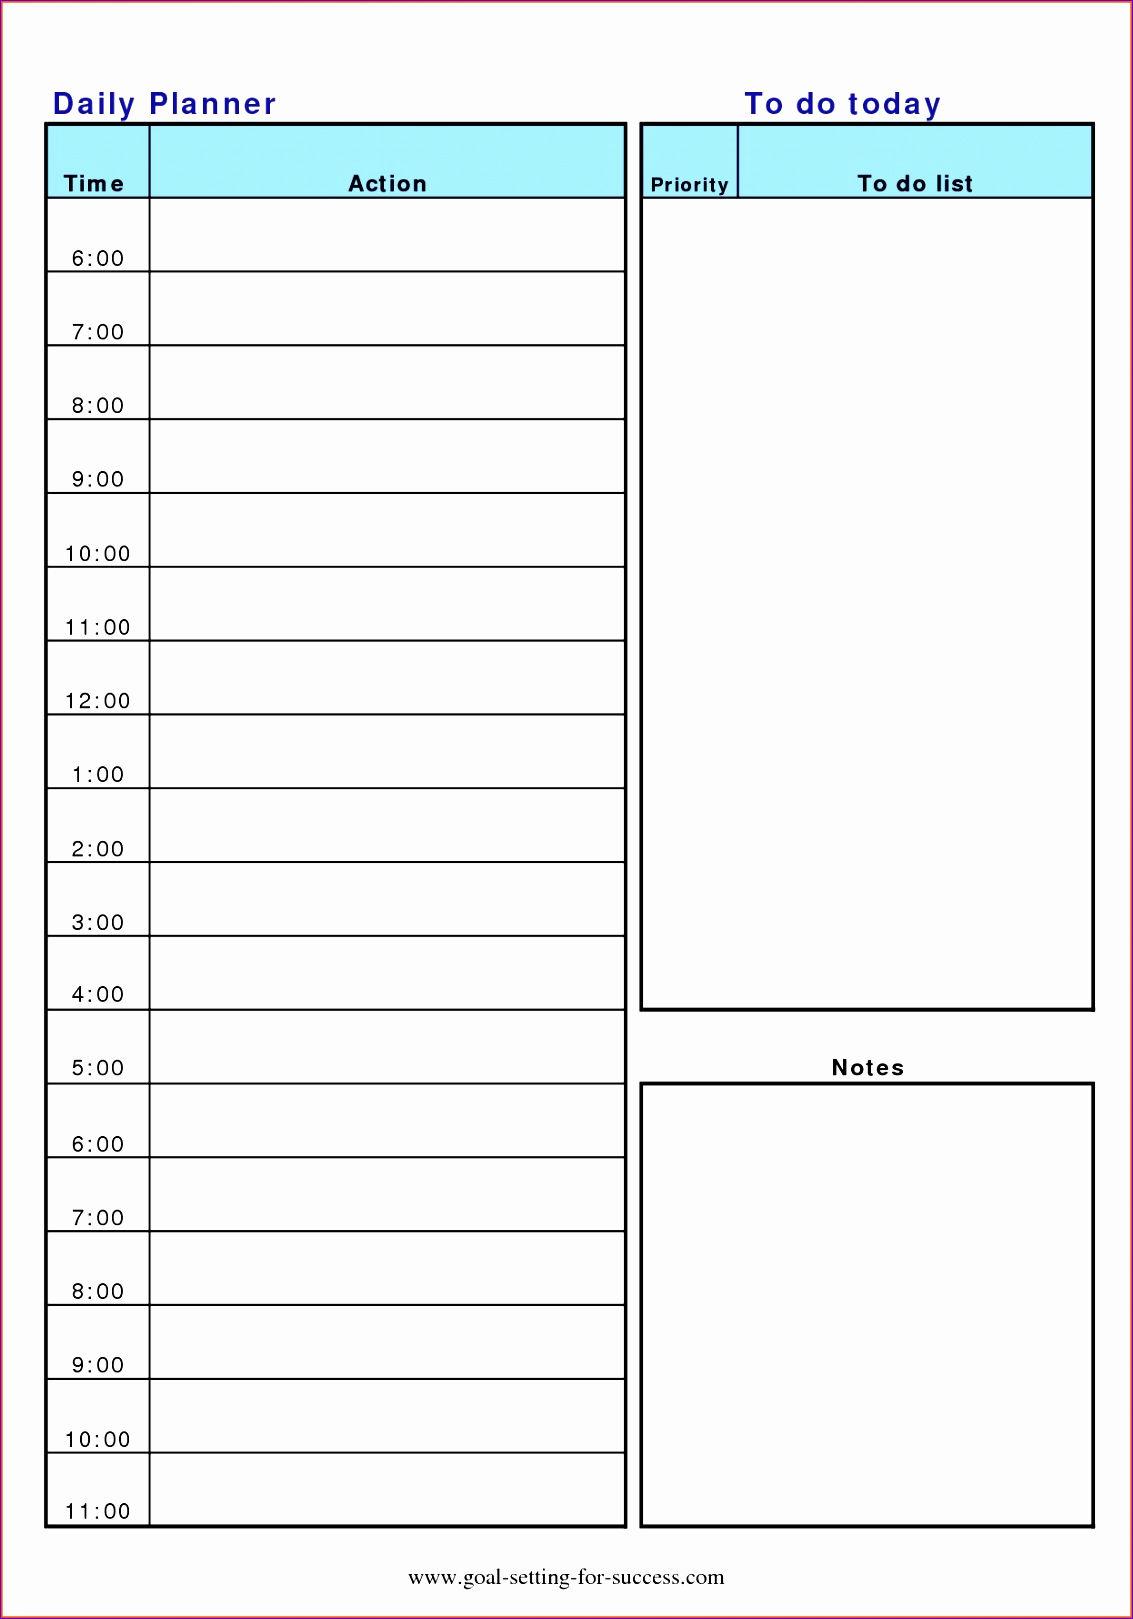 Daily Planner Template Excel New 8 Daily Planner Excel Template Exceltemplates